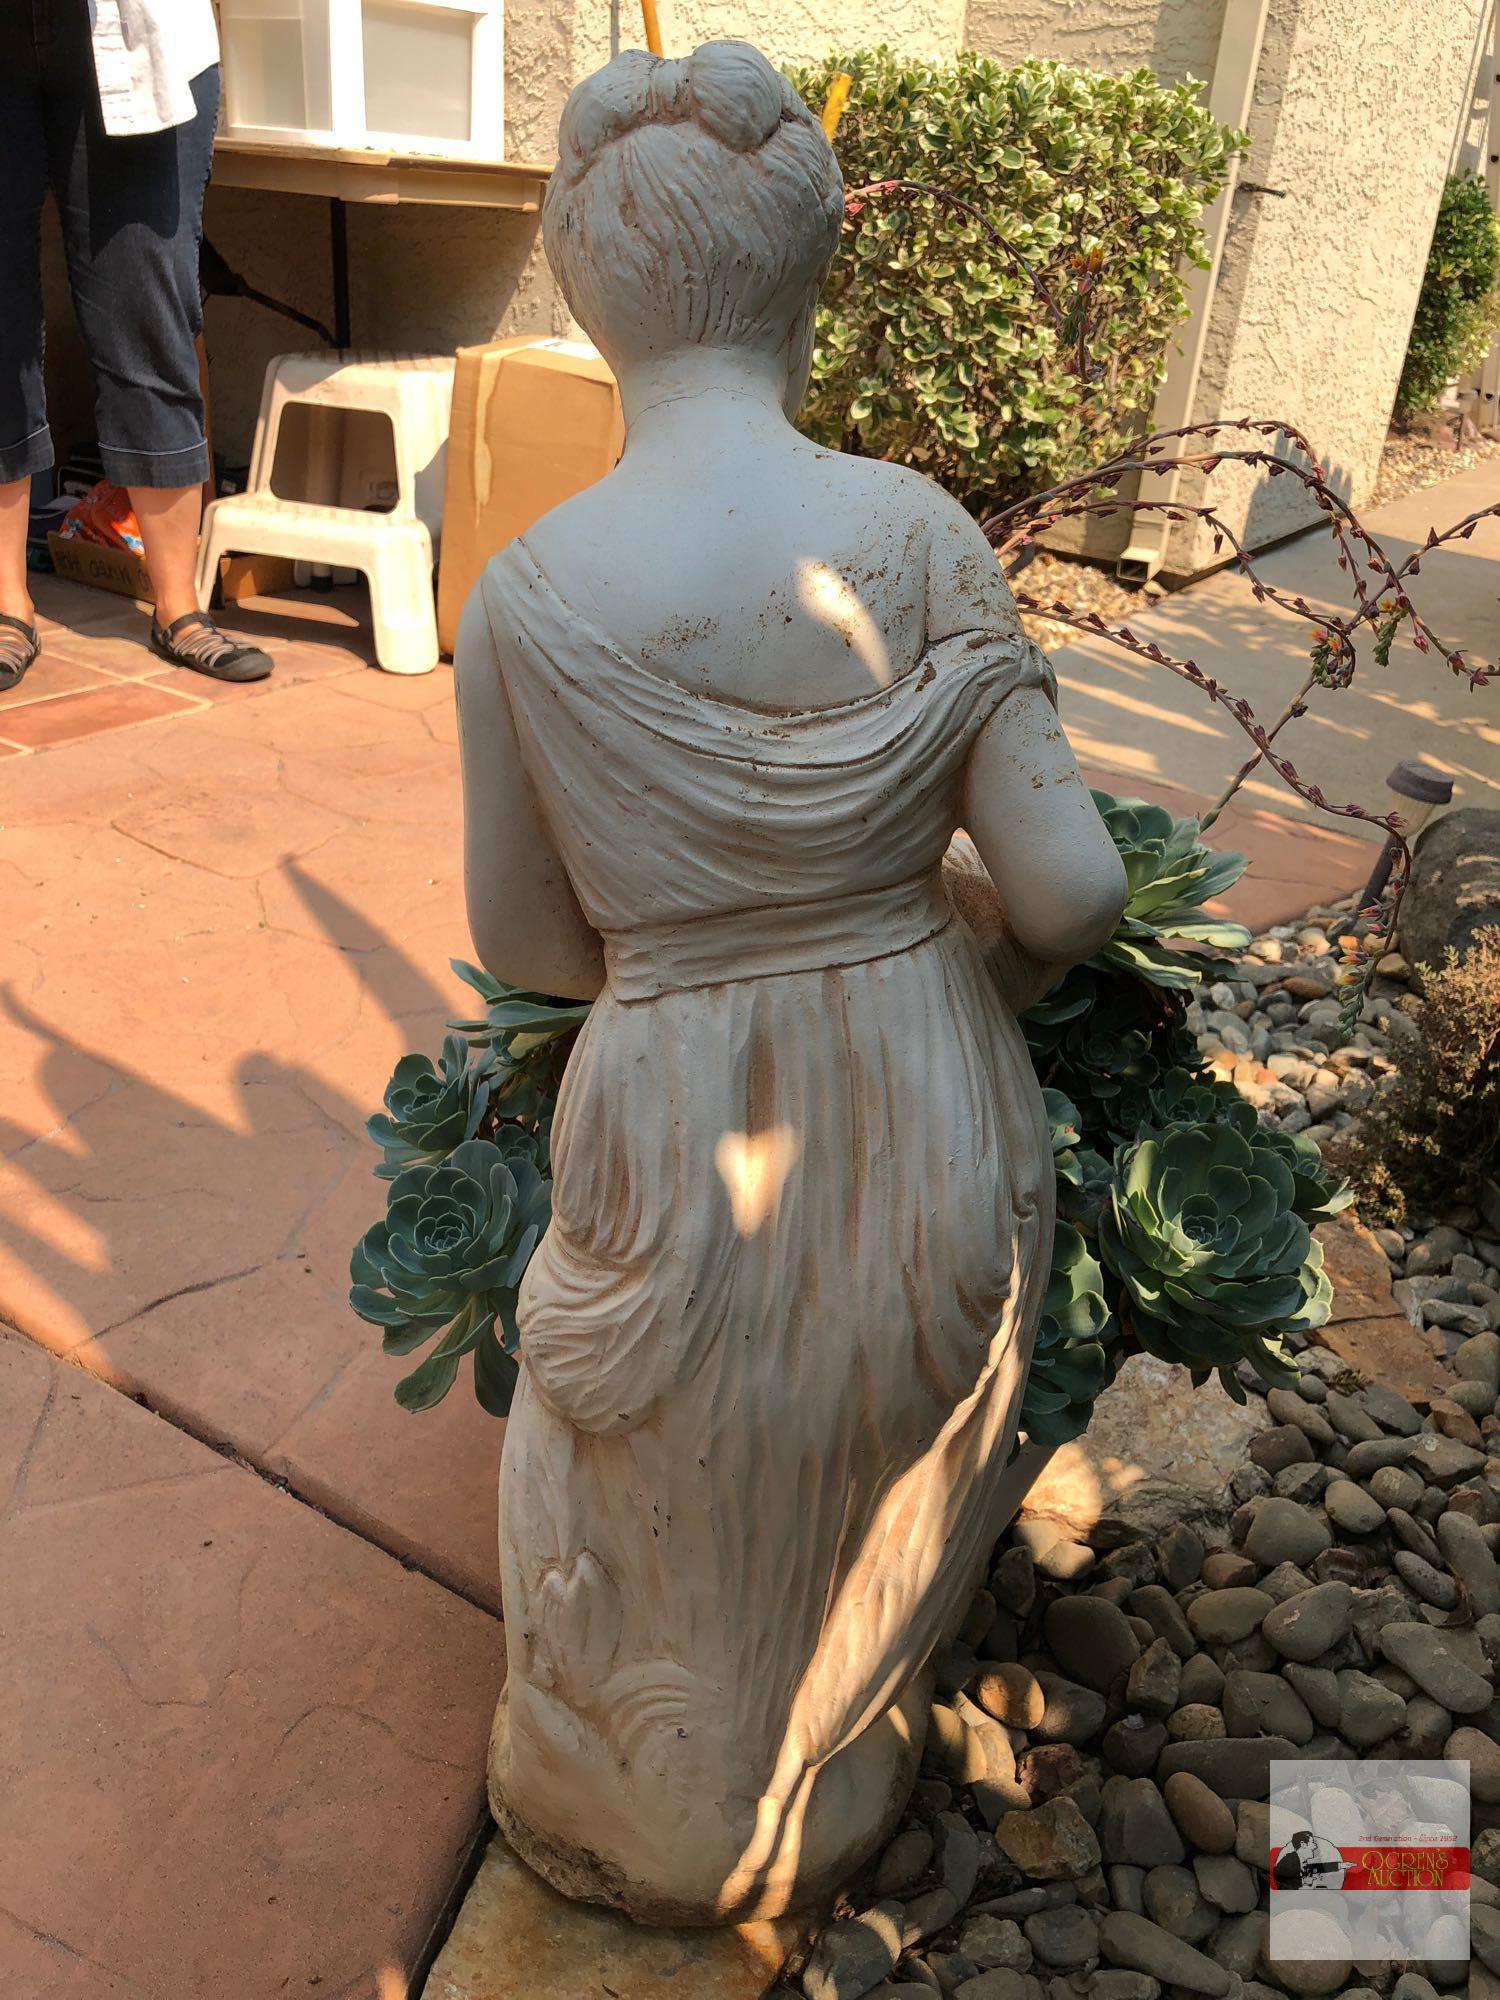 Yard & Garden - Woman w/urn statuary planter, potted hens/chickens, 32"hx18"wx22"d, natural cracking